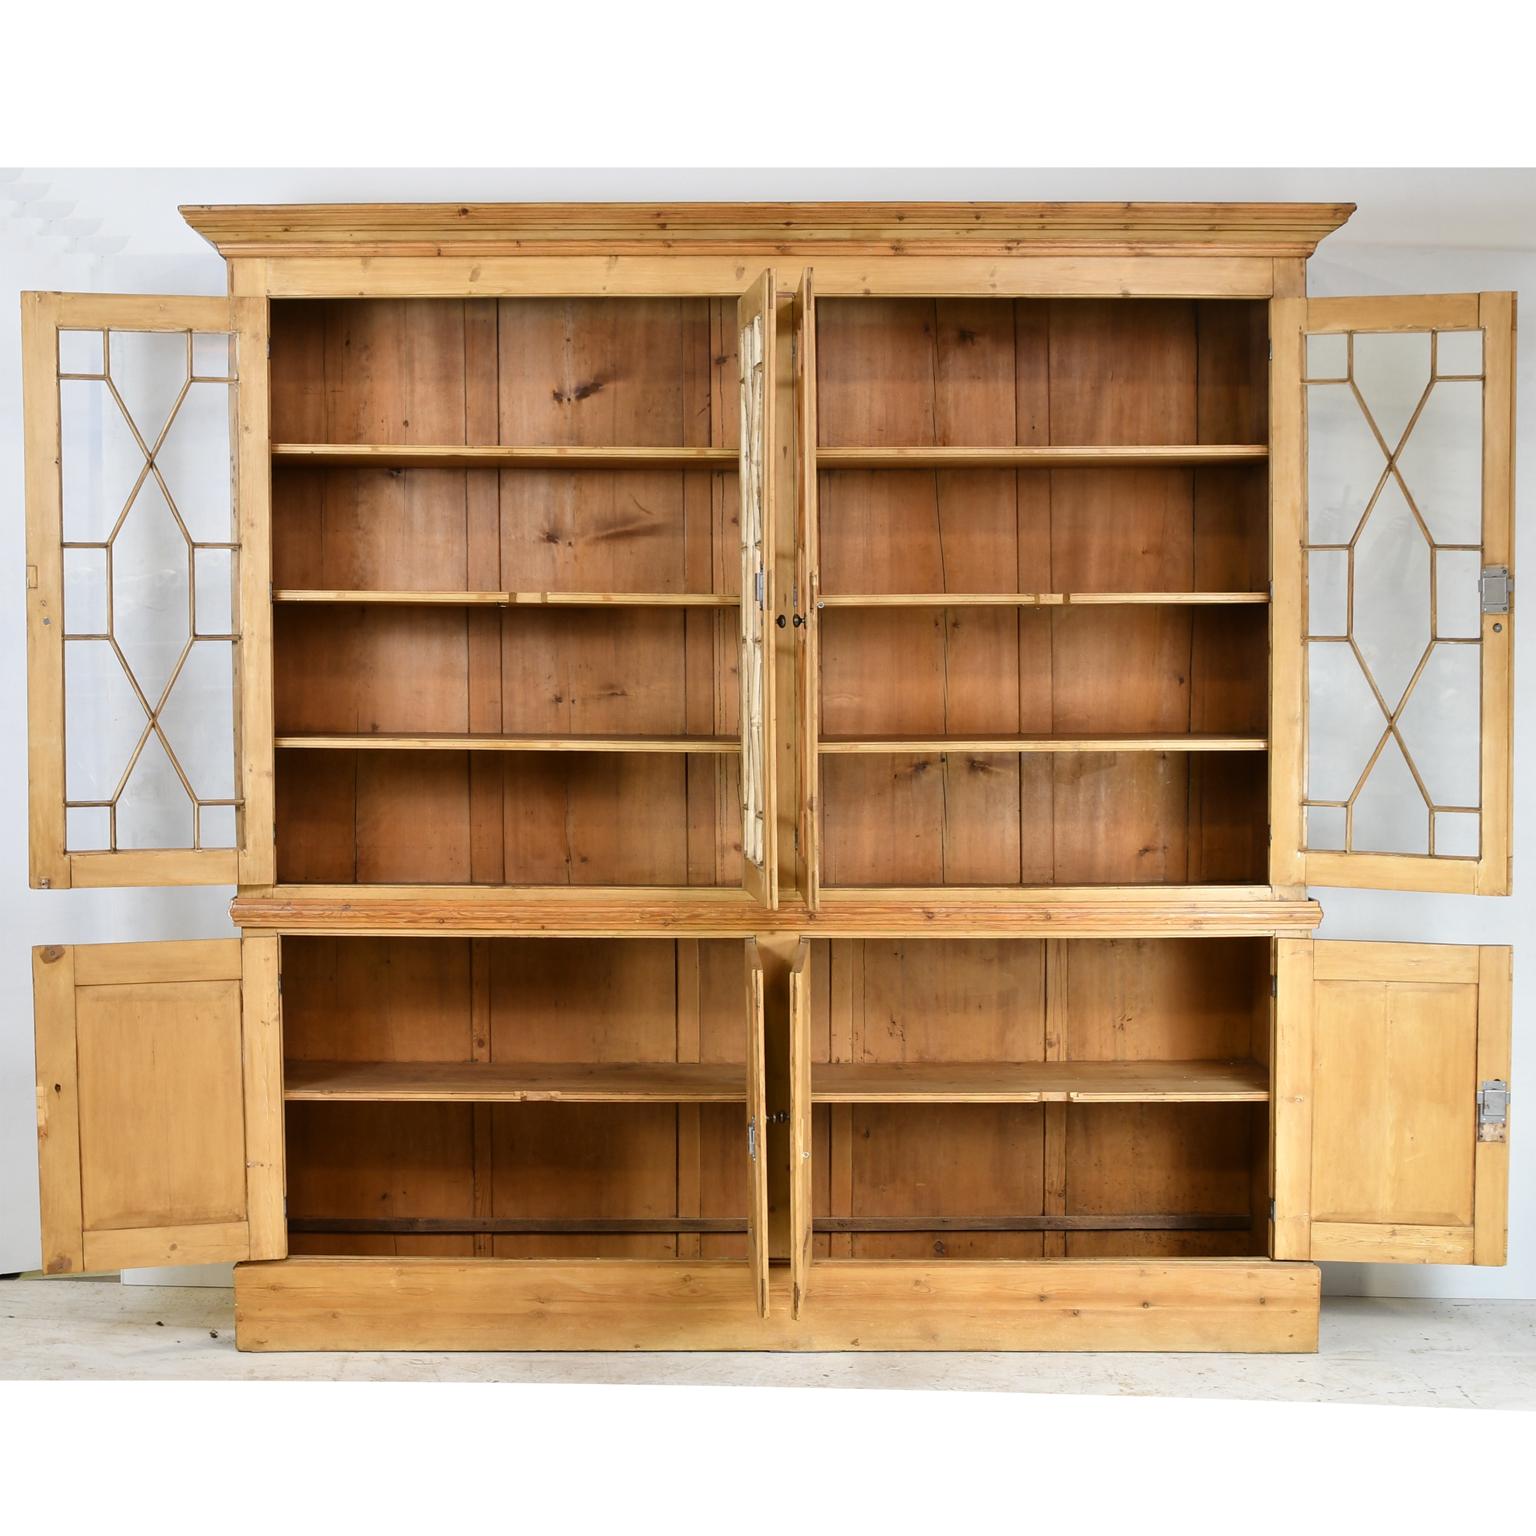 English pine bookcase/display cabinet with glazed doors in upper cupboard with fixed shelves and lower cupboard for storage resting on a plinth base.  19th century and later. 
Breaks down into 2 sections for transportation and installation
Measures: